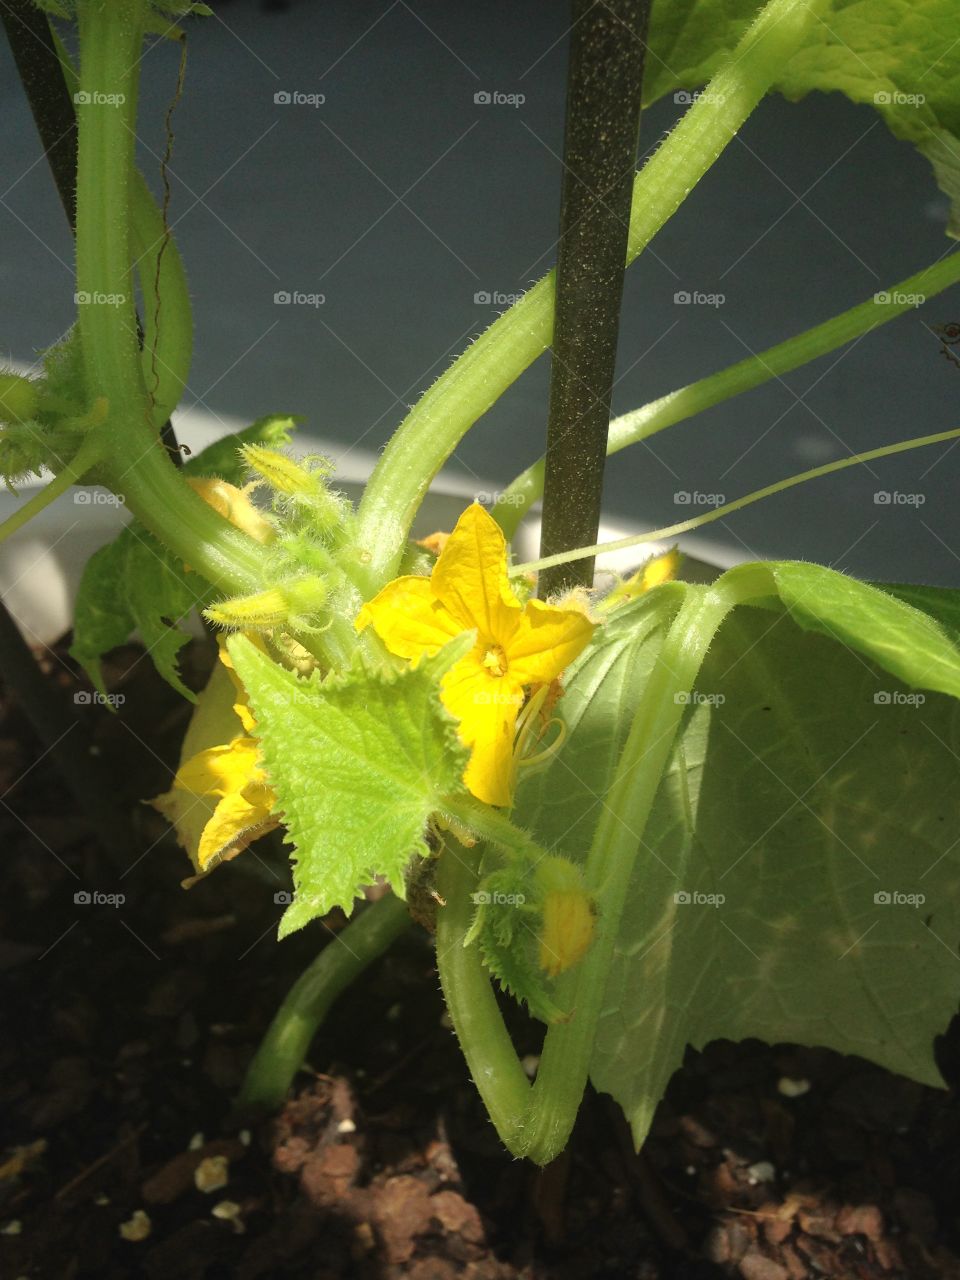 Cucumber plant. Young cucumber plant